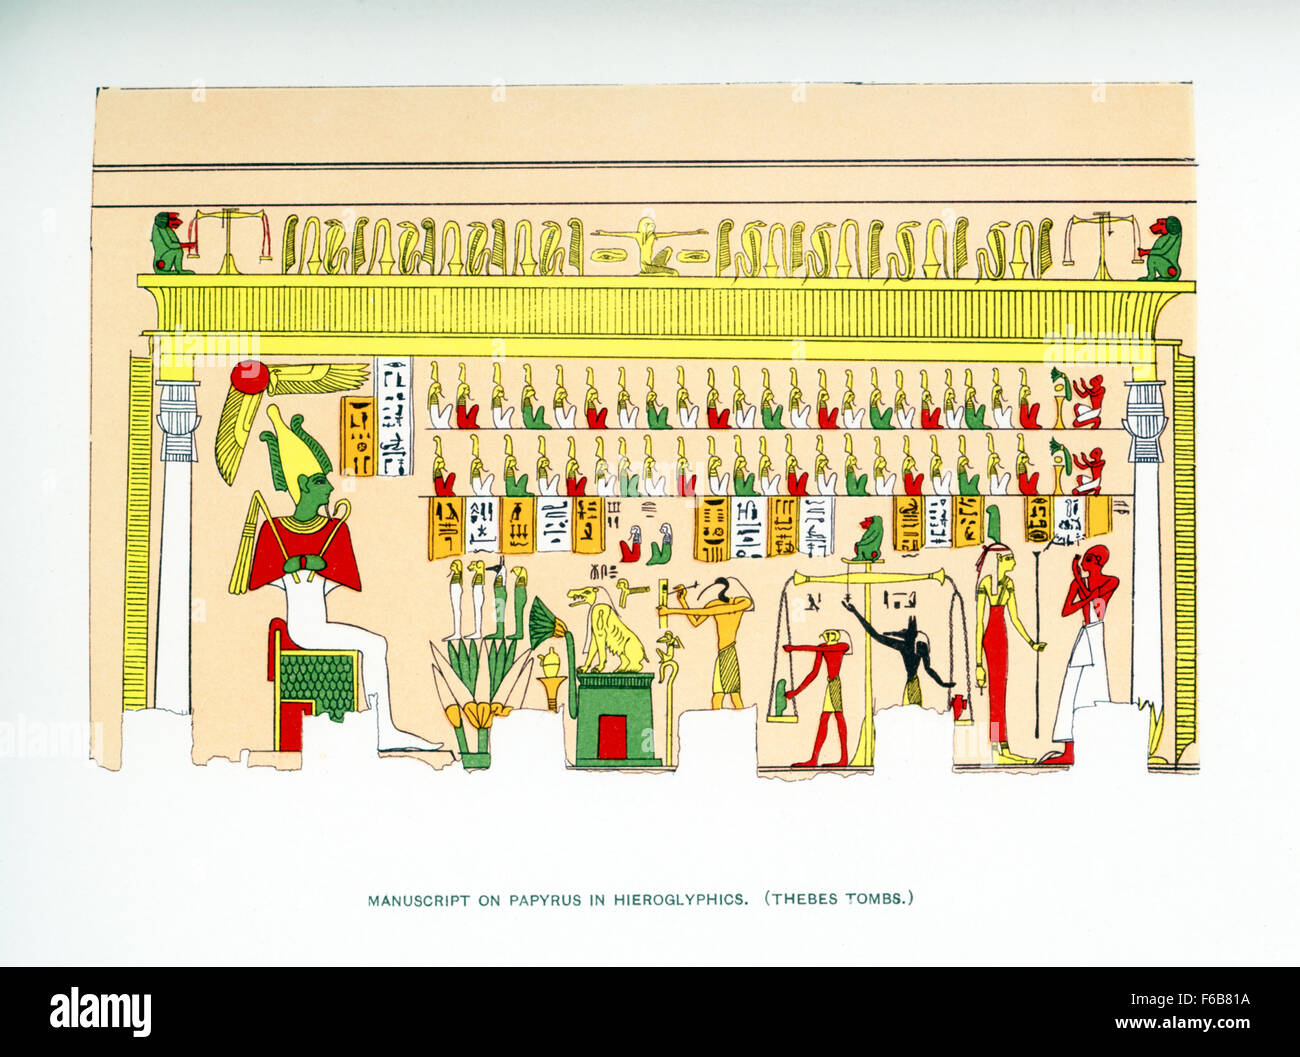 Pictured here is a manuscript drawn on papyrus of hieroglyphs and art found in an ancient Egyptian tomb in Thebes, with its many rock-cut tombs, in southern Egypt. This illustration dates to 1903 and appeared in the book History of Egypt by French Egyptologist Gaston Maspero. It brings together many of the scenes found in the tomb. Among these are  the god of the underworld Osiris (his skin color green, symbolizing rebirth) sitting at left. In front are the four sons of Horus (Horus was Osiris' son). The god of writing Thoth is inscribing on a a rectangular piece of papyrus. Stock Photo